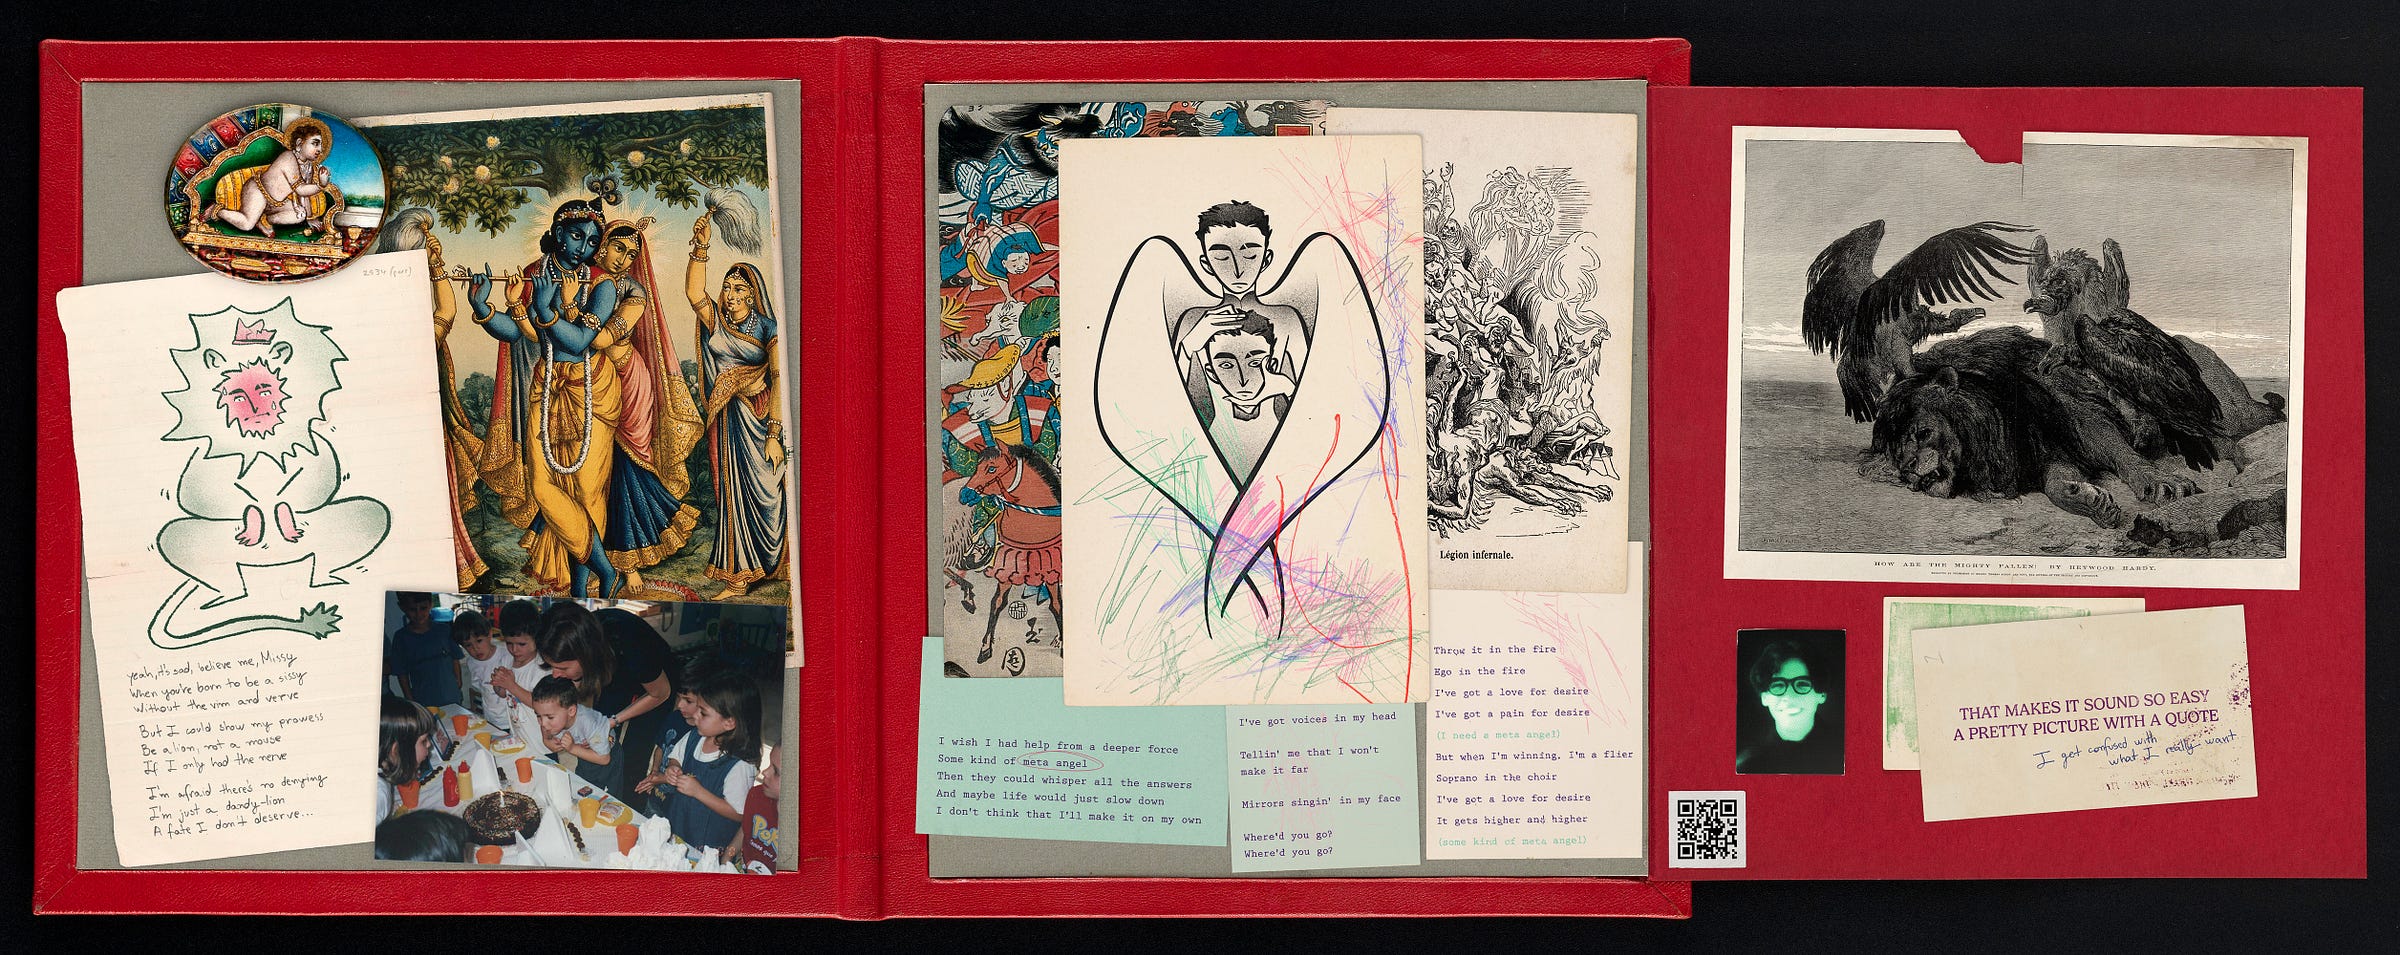 Various kinds of pictures lay over a red and gray opened album; the images are printed and drawn, and there are two photographs. Besides the photos, some things are illustrated, and others display song lyrics.